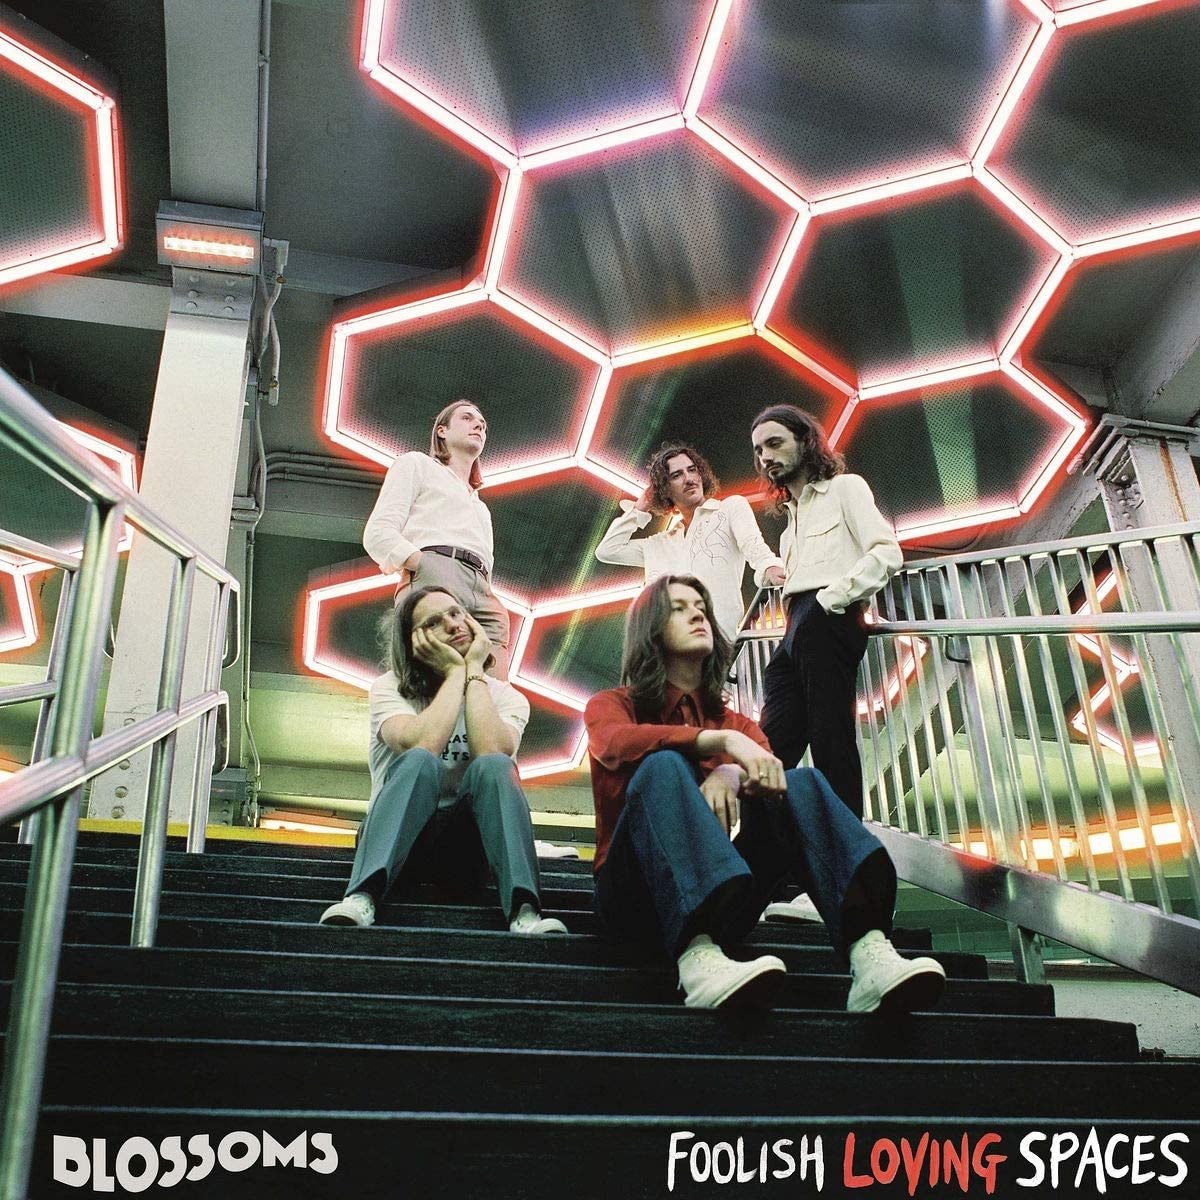 28. Foolish Loving Spaces - Blossoms.I really don't listen to this band enough & I don't know why, as they get better and better with each album I find. Best tracks:Your GirlfriendOh No (I Think I'm In Love)My Swimming BrainSunday Was A Friend Of Mine